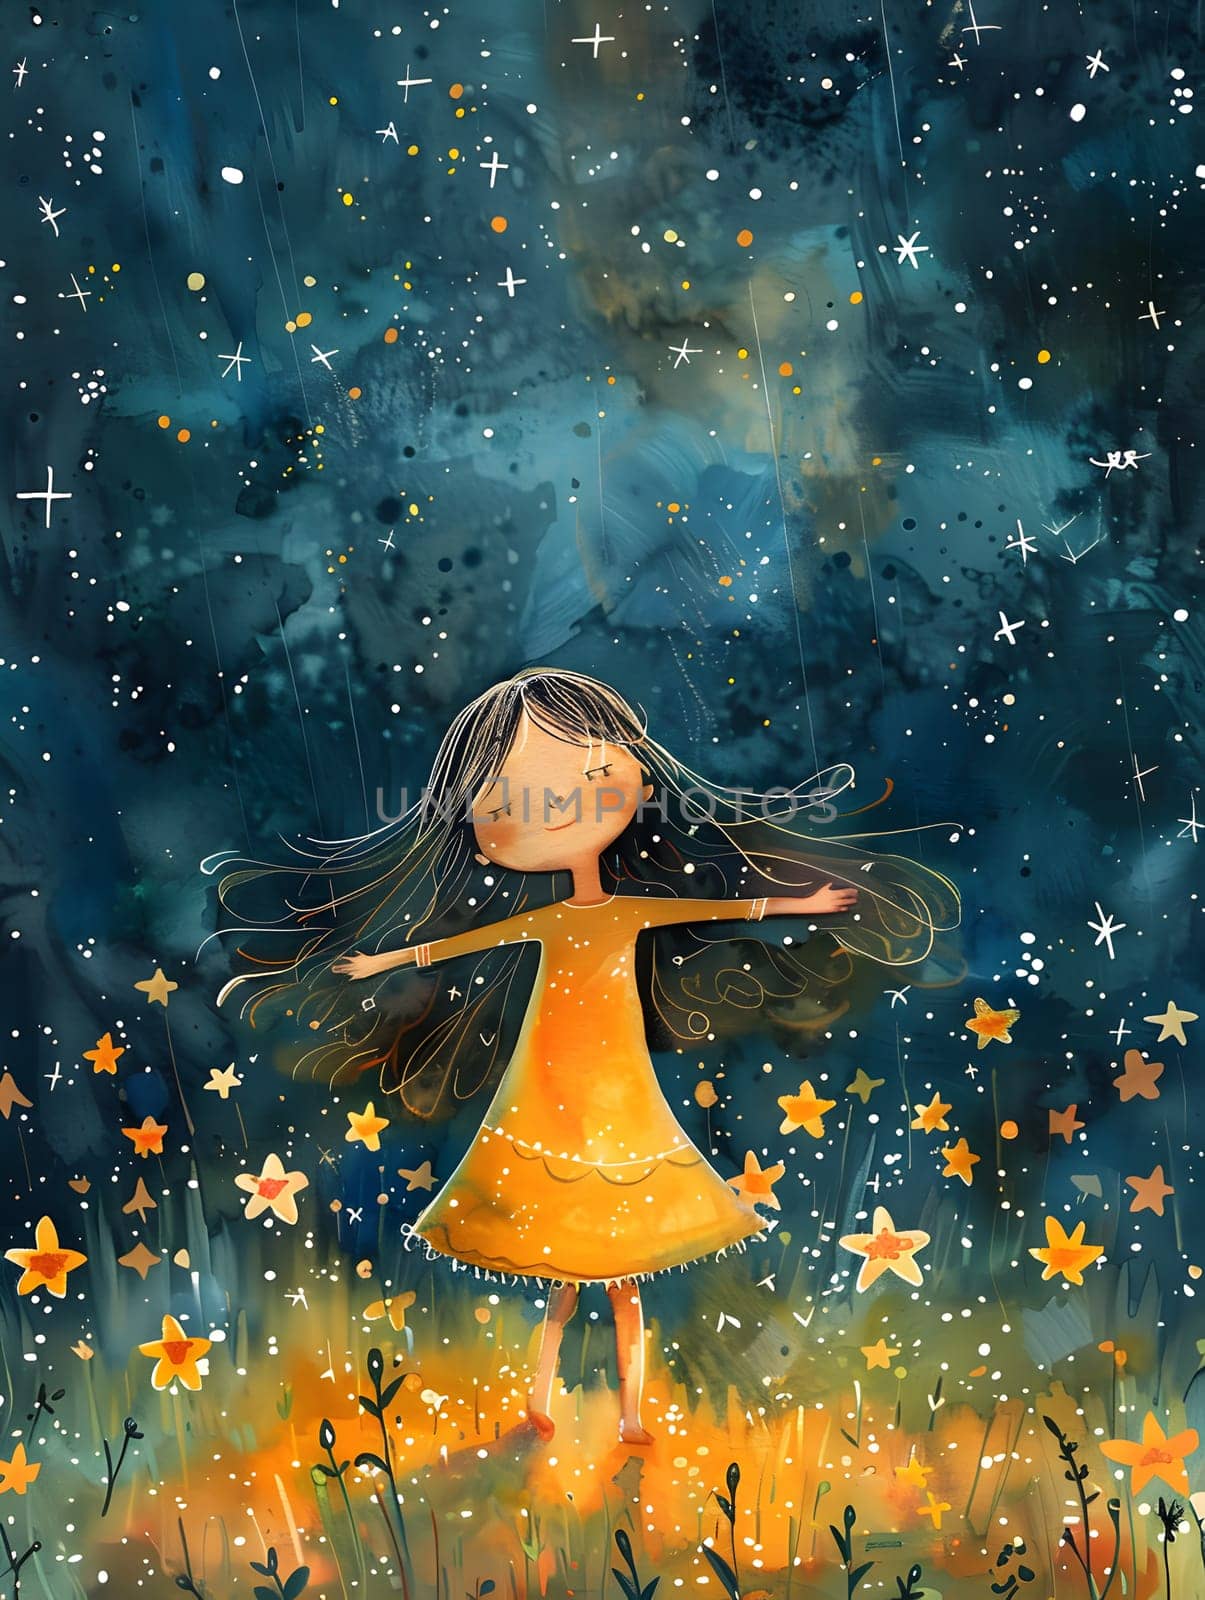 A young girl in a bright yellow dress stands in a field filled with twinkling stars, creating a magical atmosphere in the natural landscape